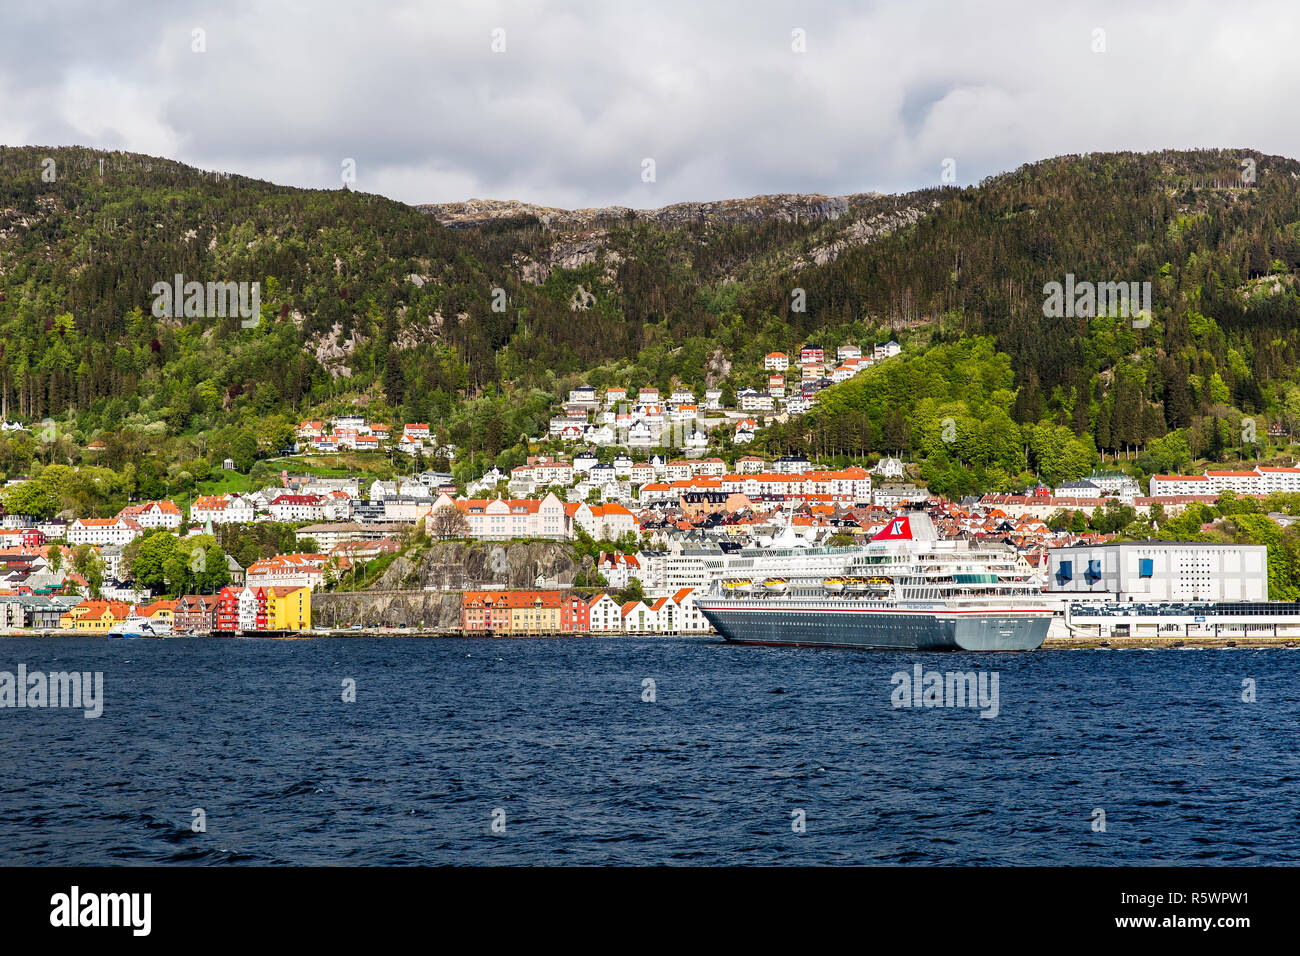 View from the water of the city of Bergen, Norway. Stock Photo